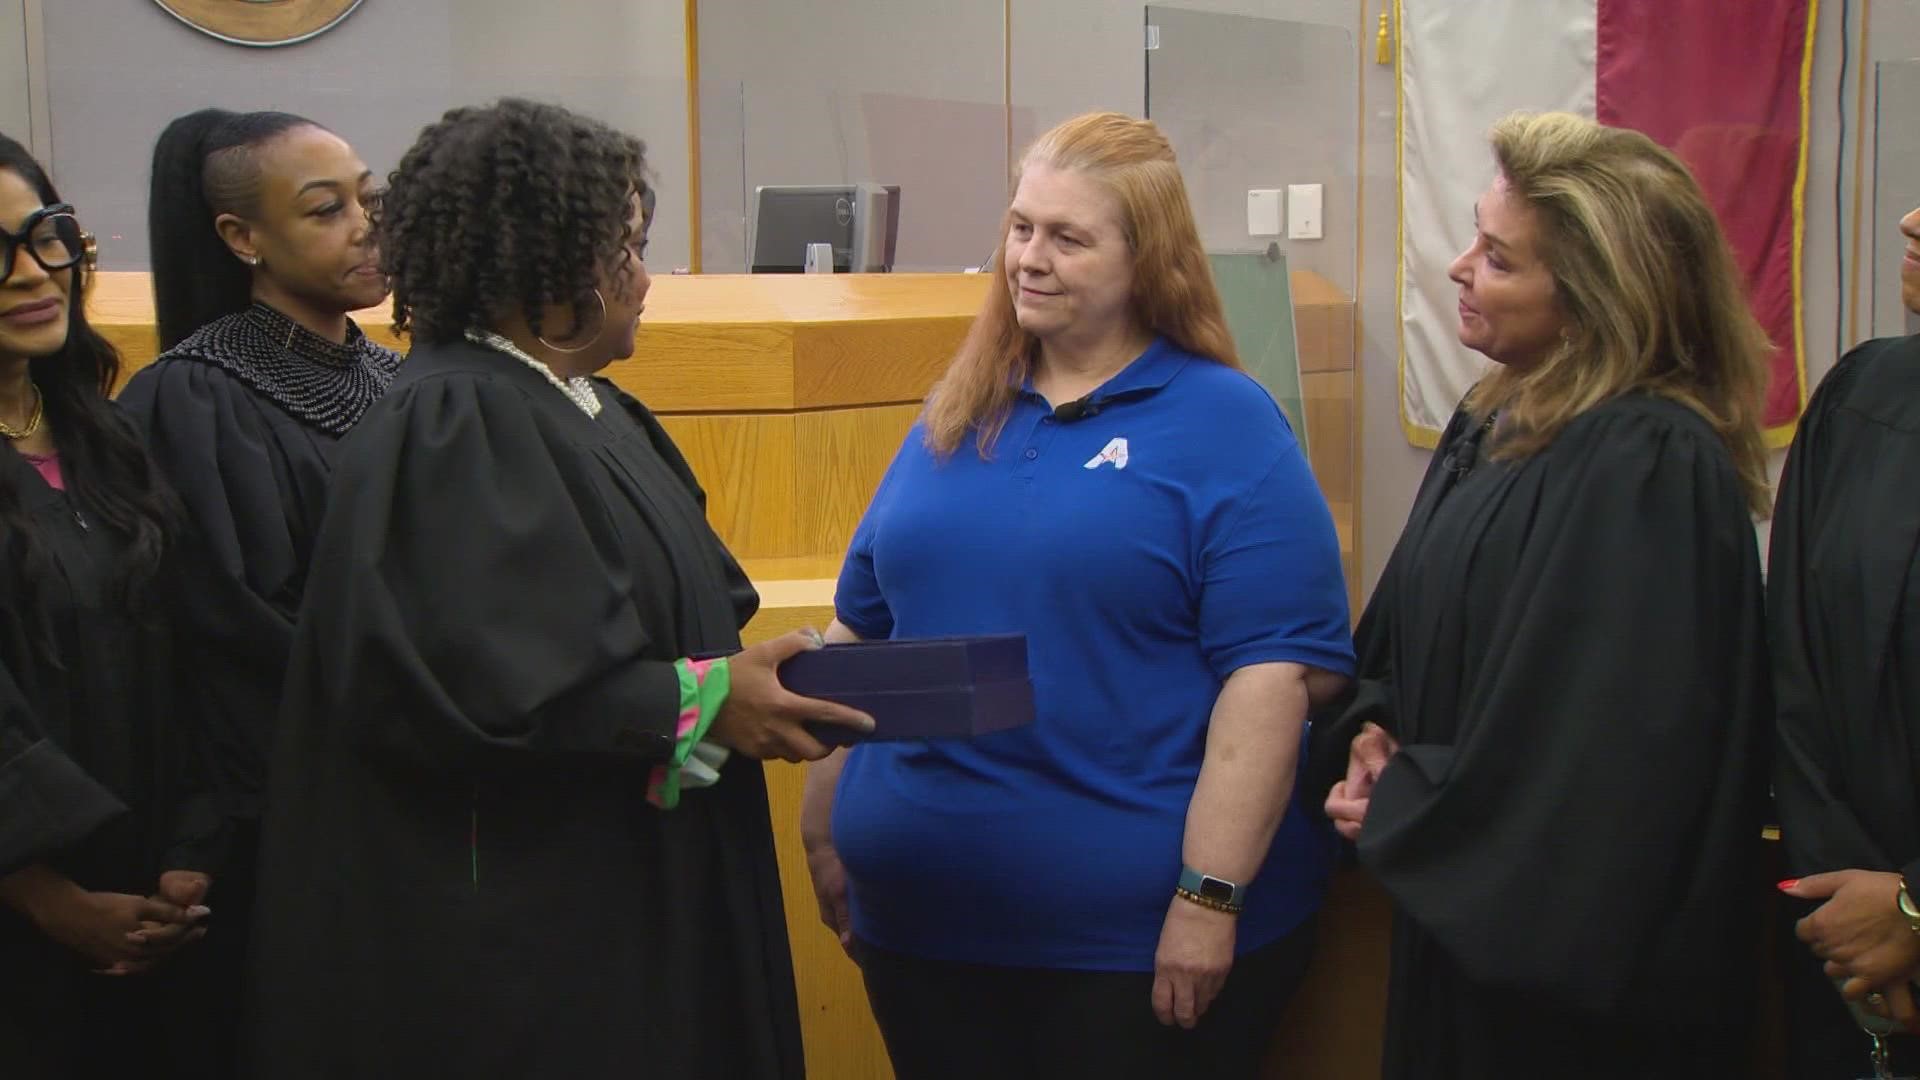 A group of Dallas County judges took time to honor Kat Kreis. They say the nurse provided life-saving aid to another juror who was experiencing a medical emergency.